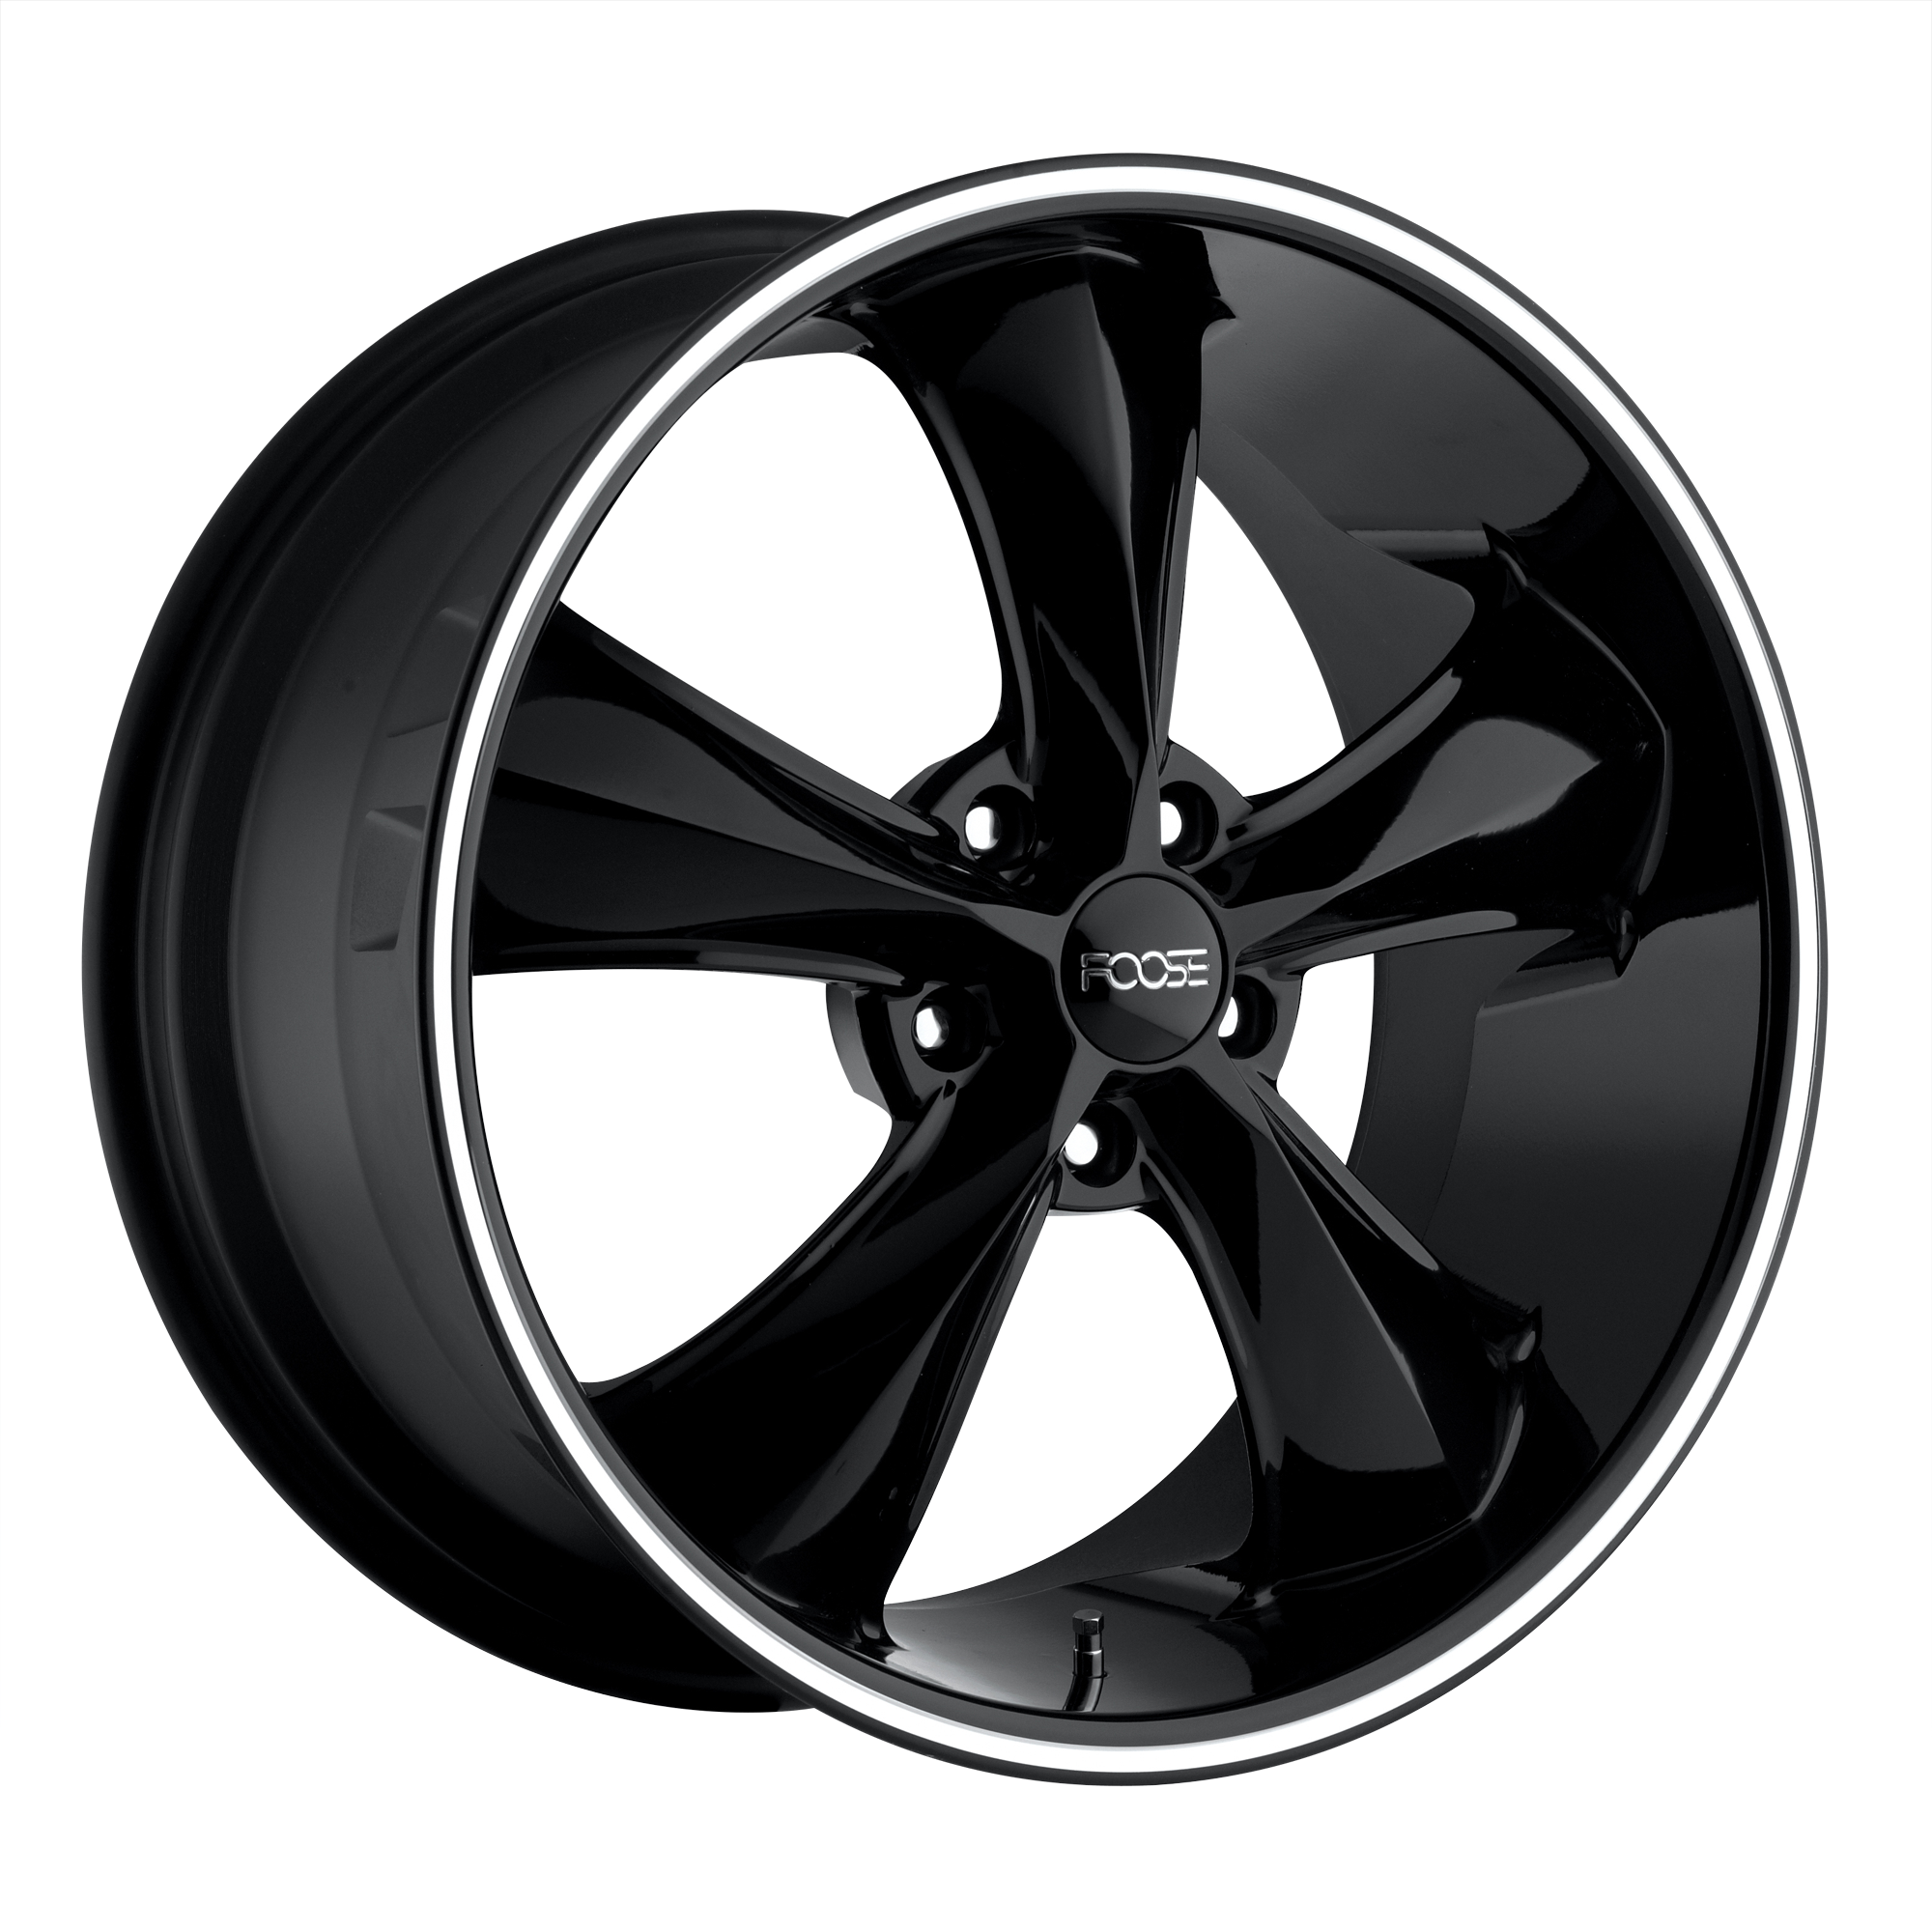 LEGEND 20x8.5 5x120.00 GLOSS BLACK MILLED (35 mm) - Tires and Engine Performance